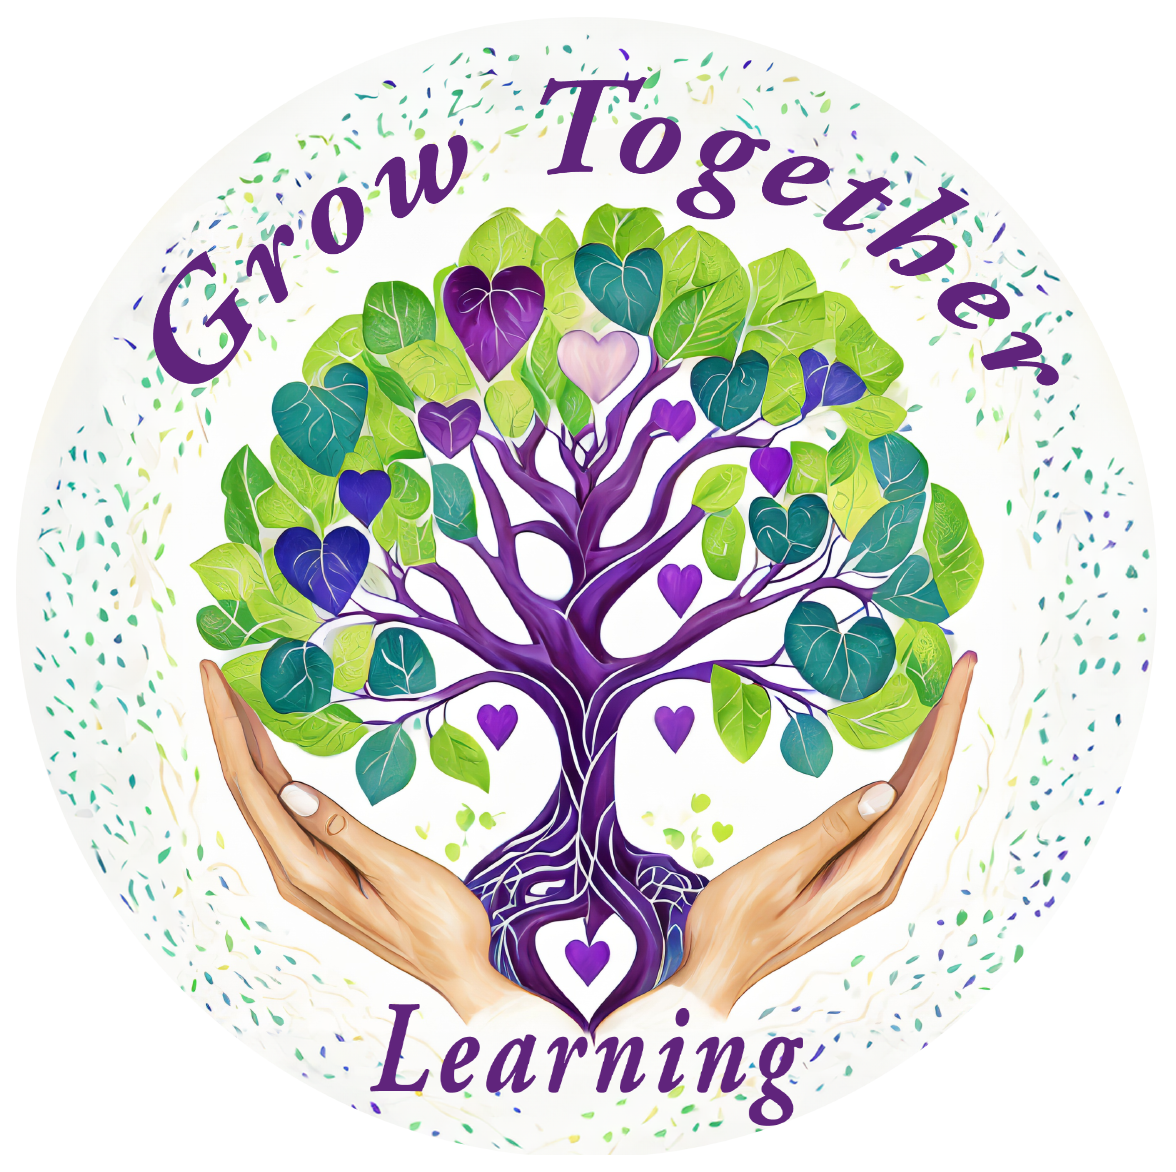 Grow Together Learning